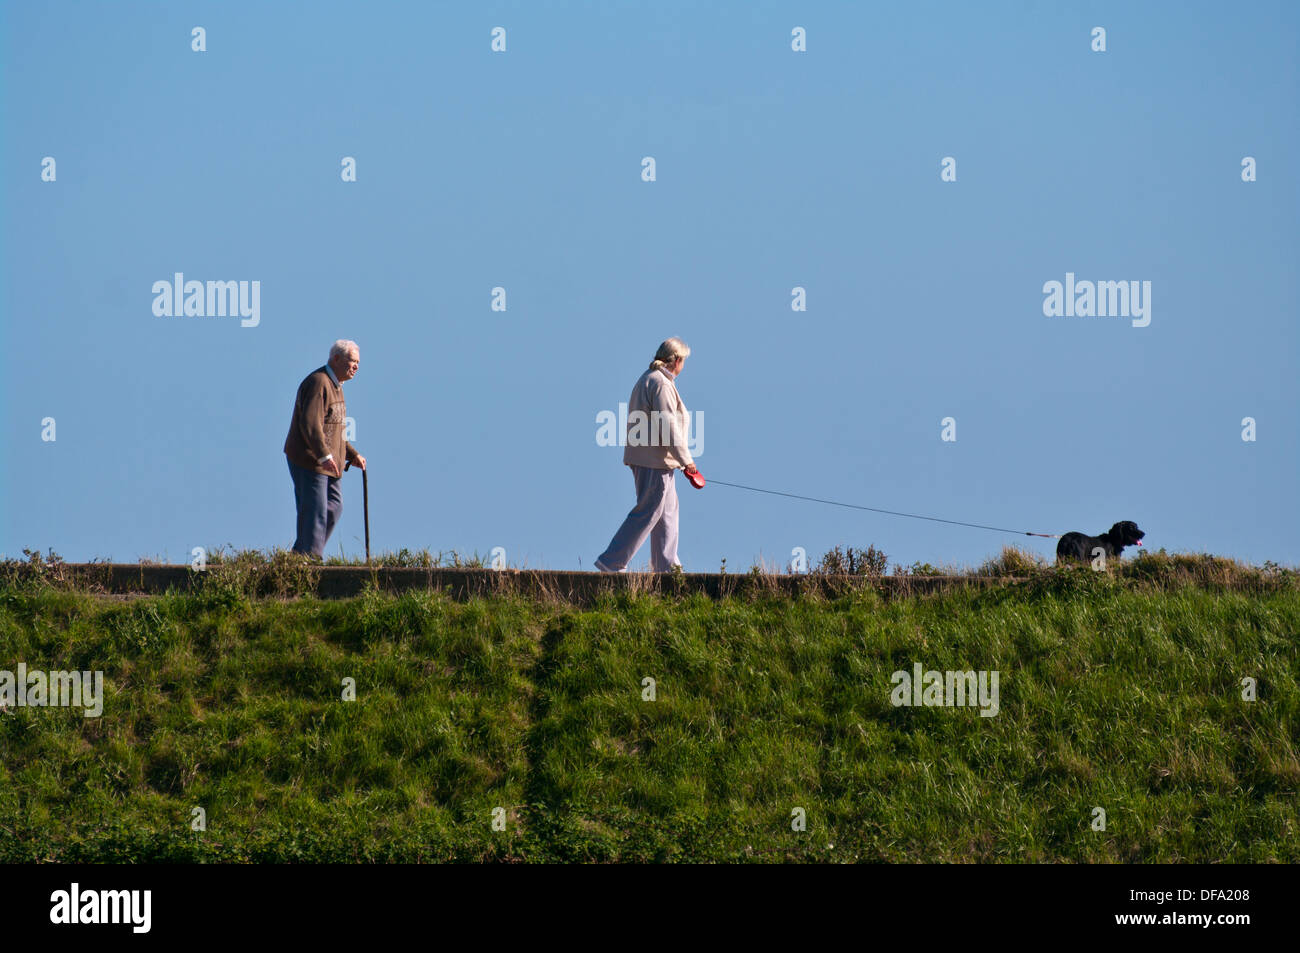 Elderly Couple Walking Their Dog On A Lead On A Sunny Day Stock Photo